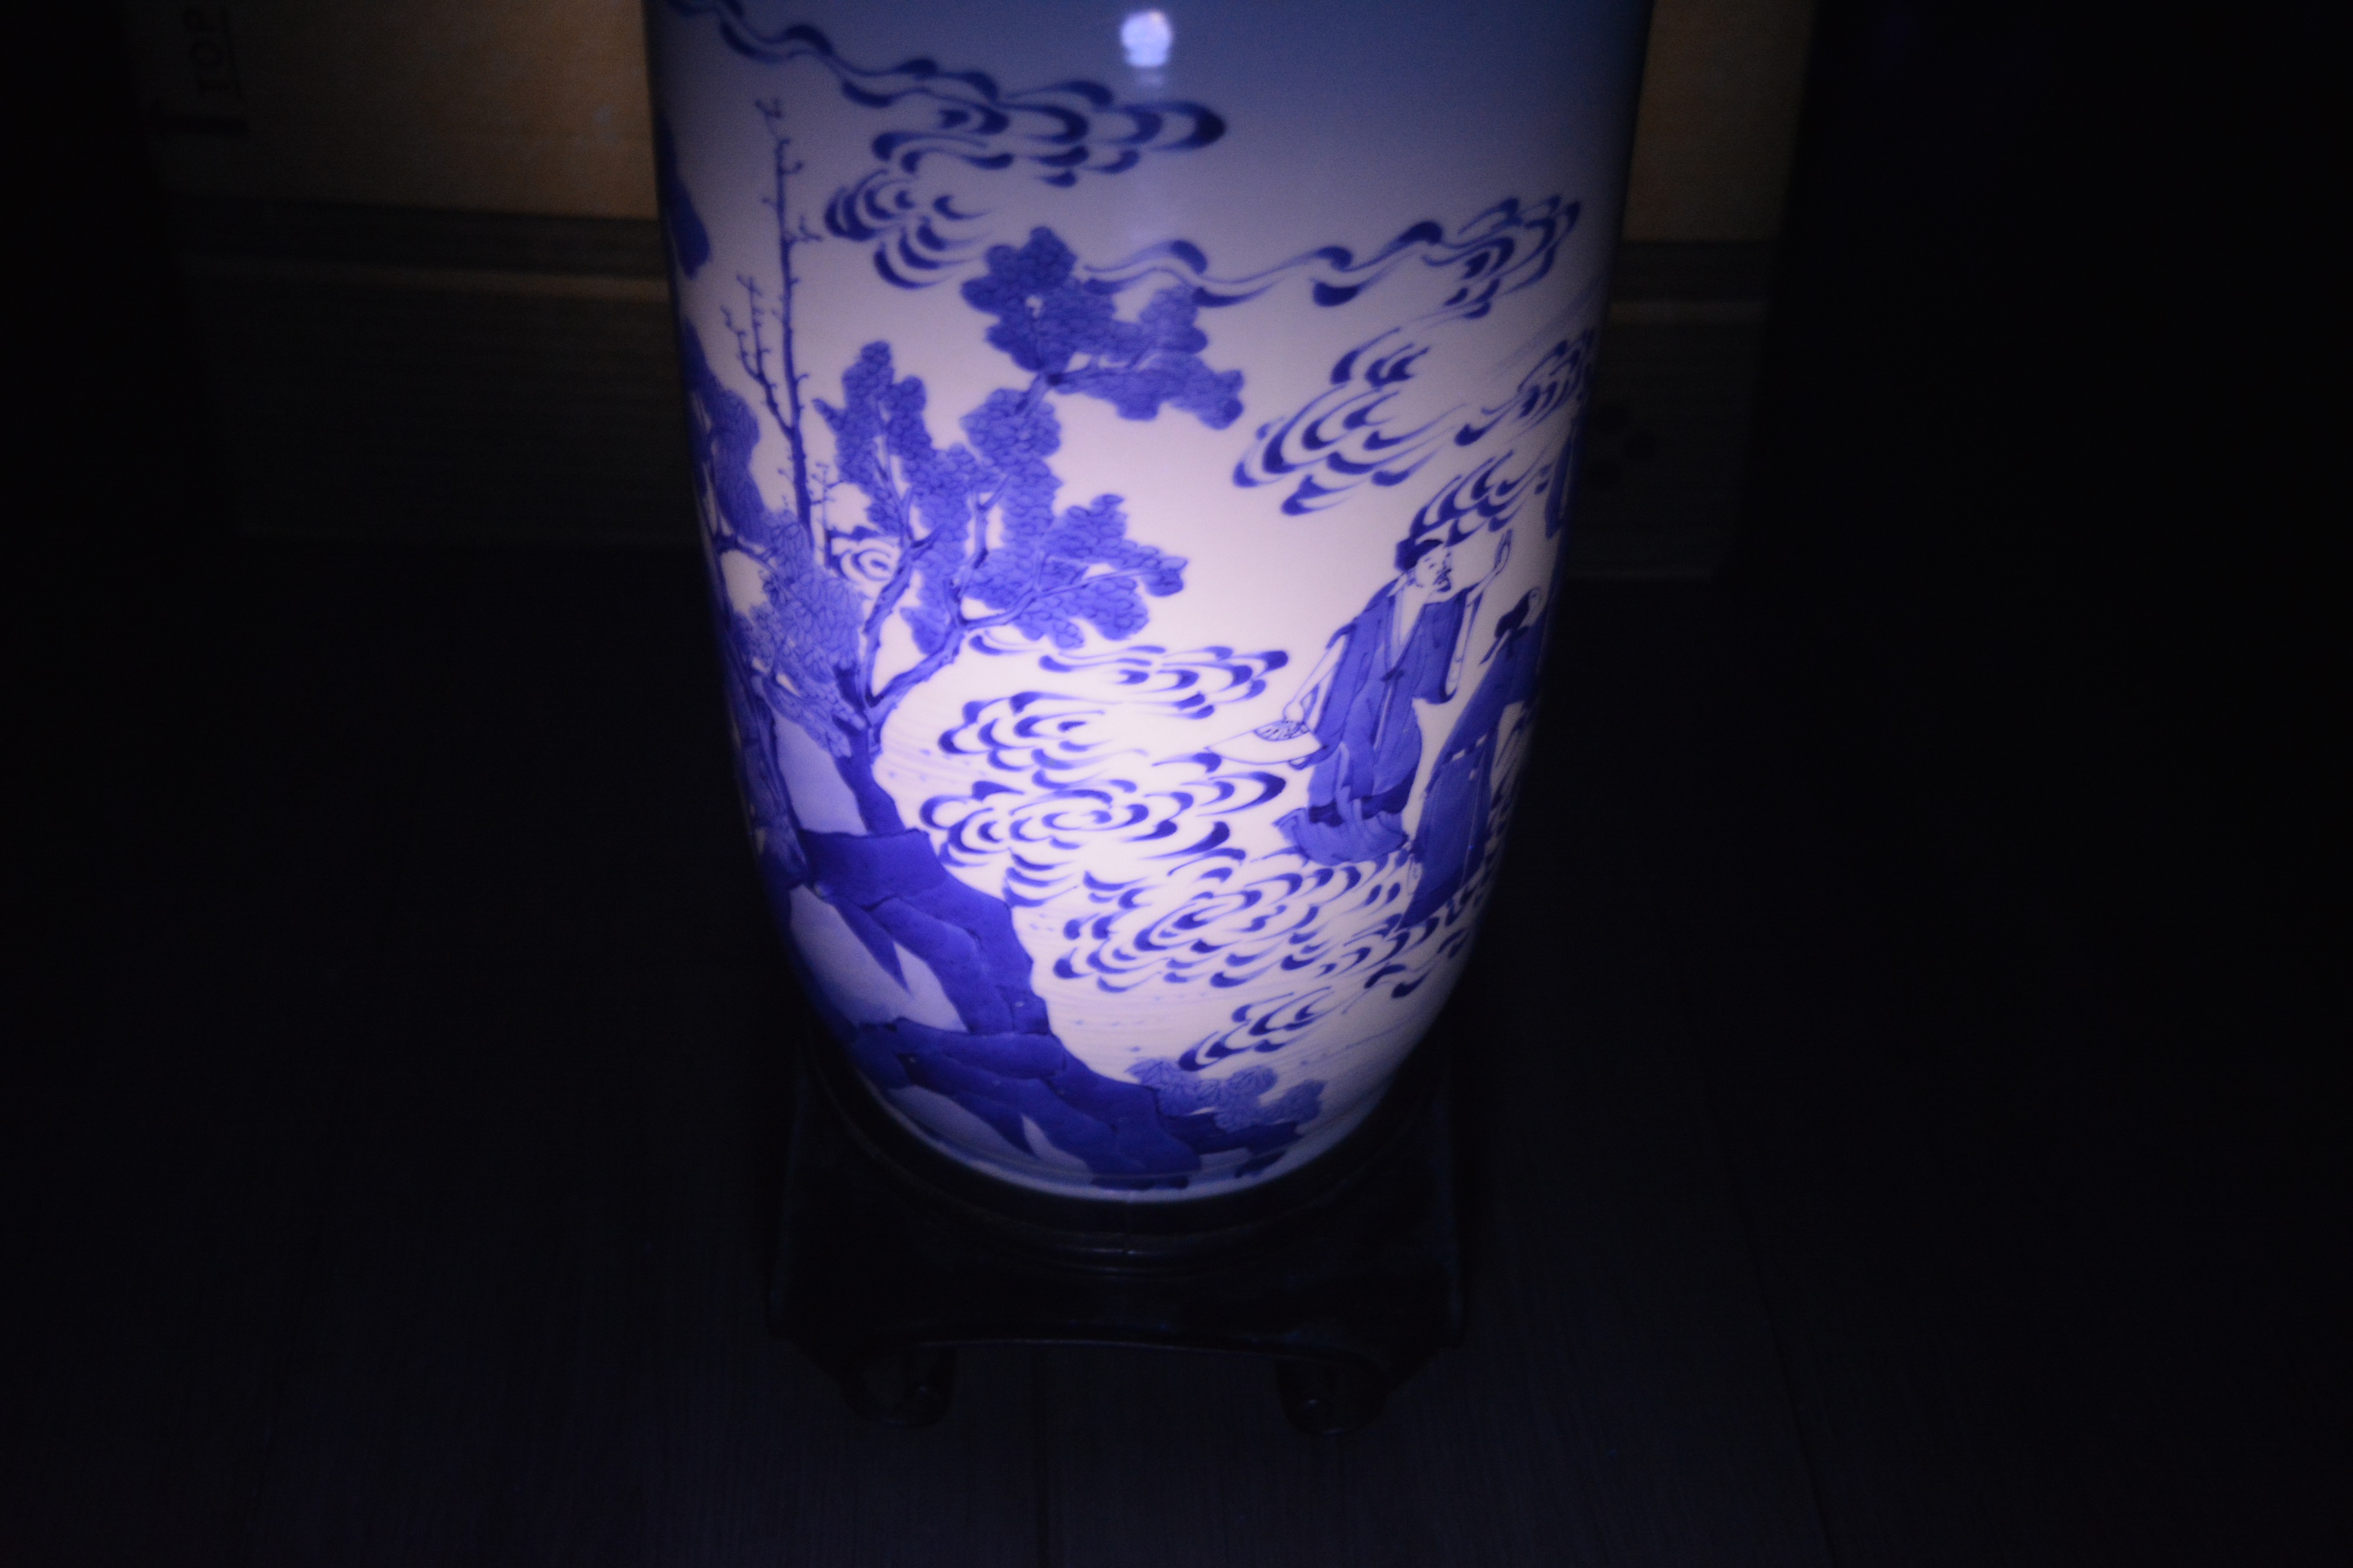 Blue and white porcelain rouleau vase Chinese, Kangxi painted with scholars, clouds, and figures - Image 32 of 33